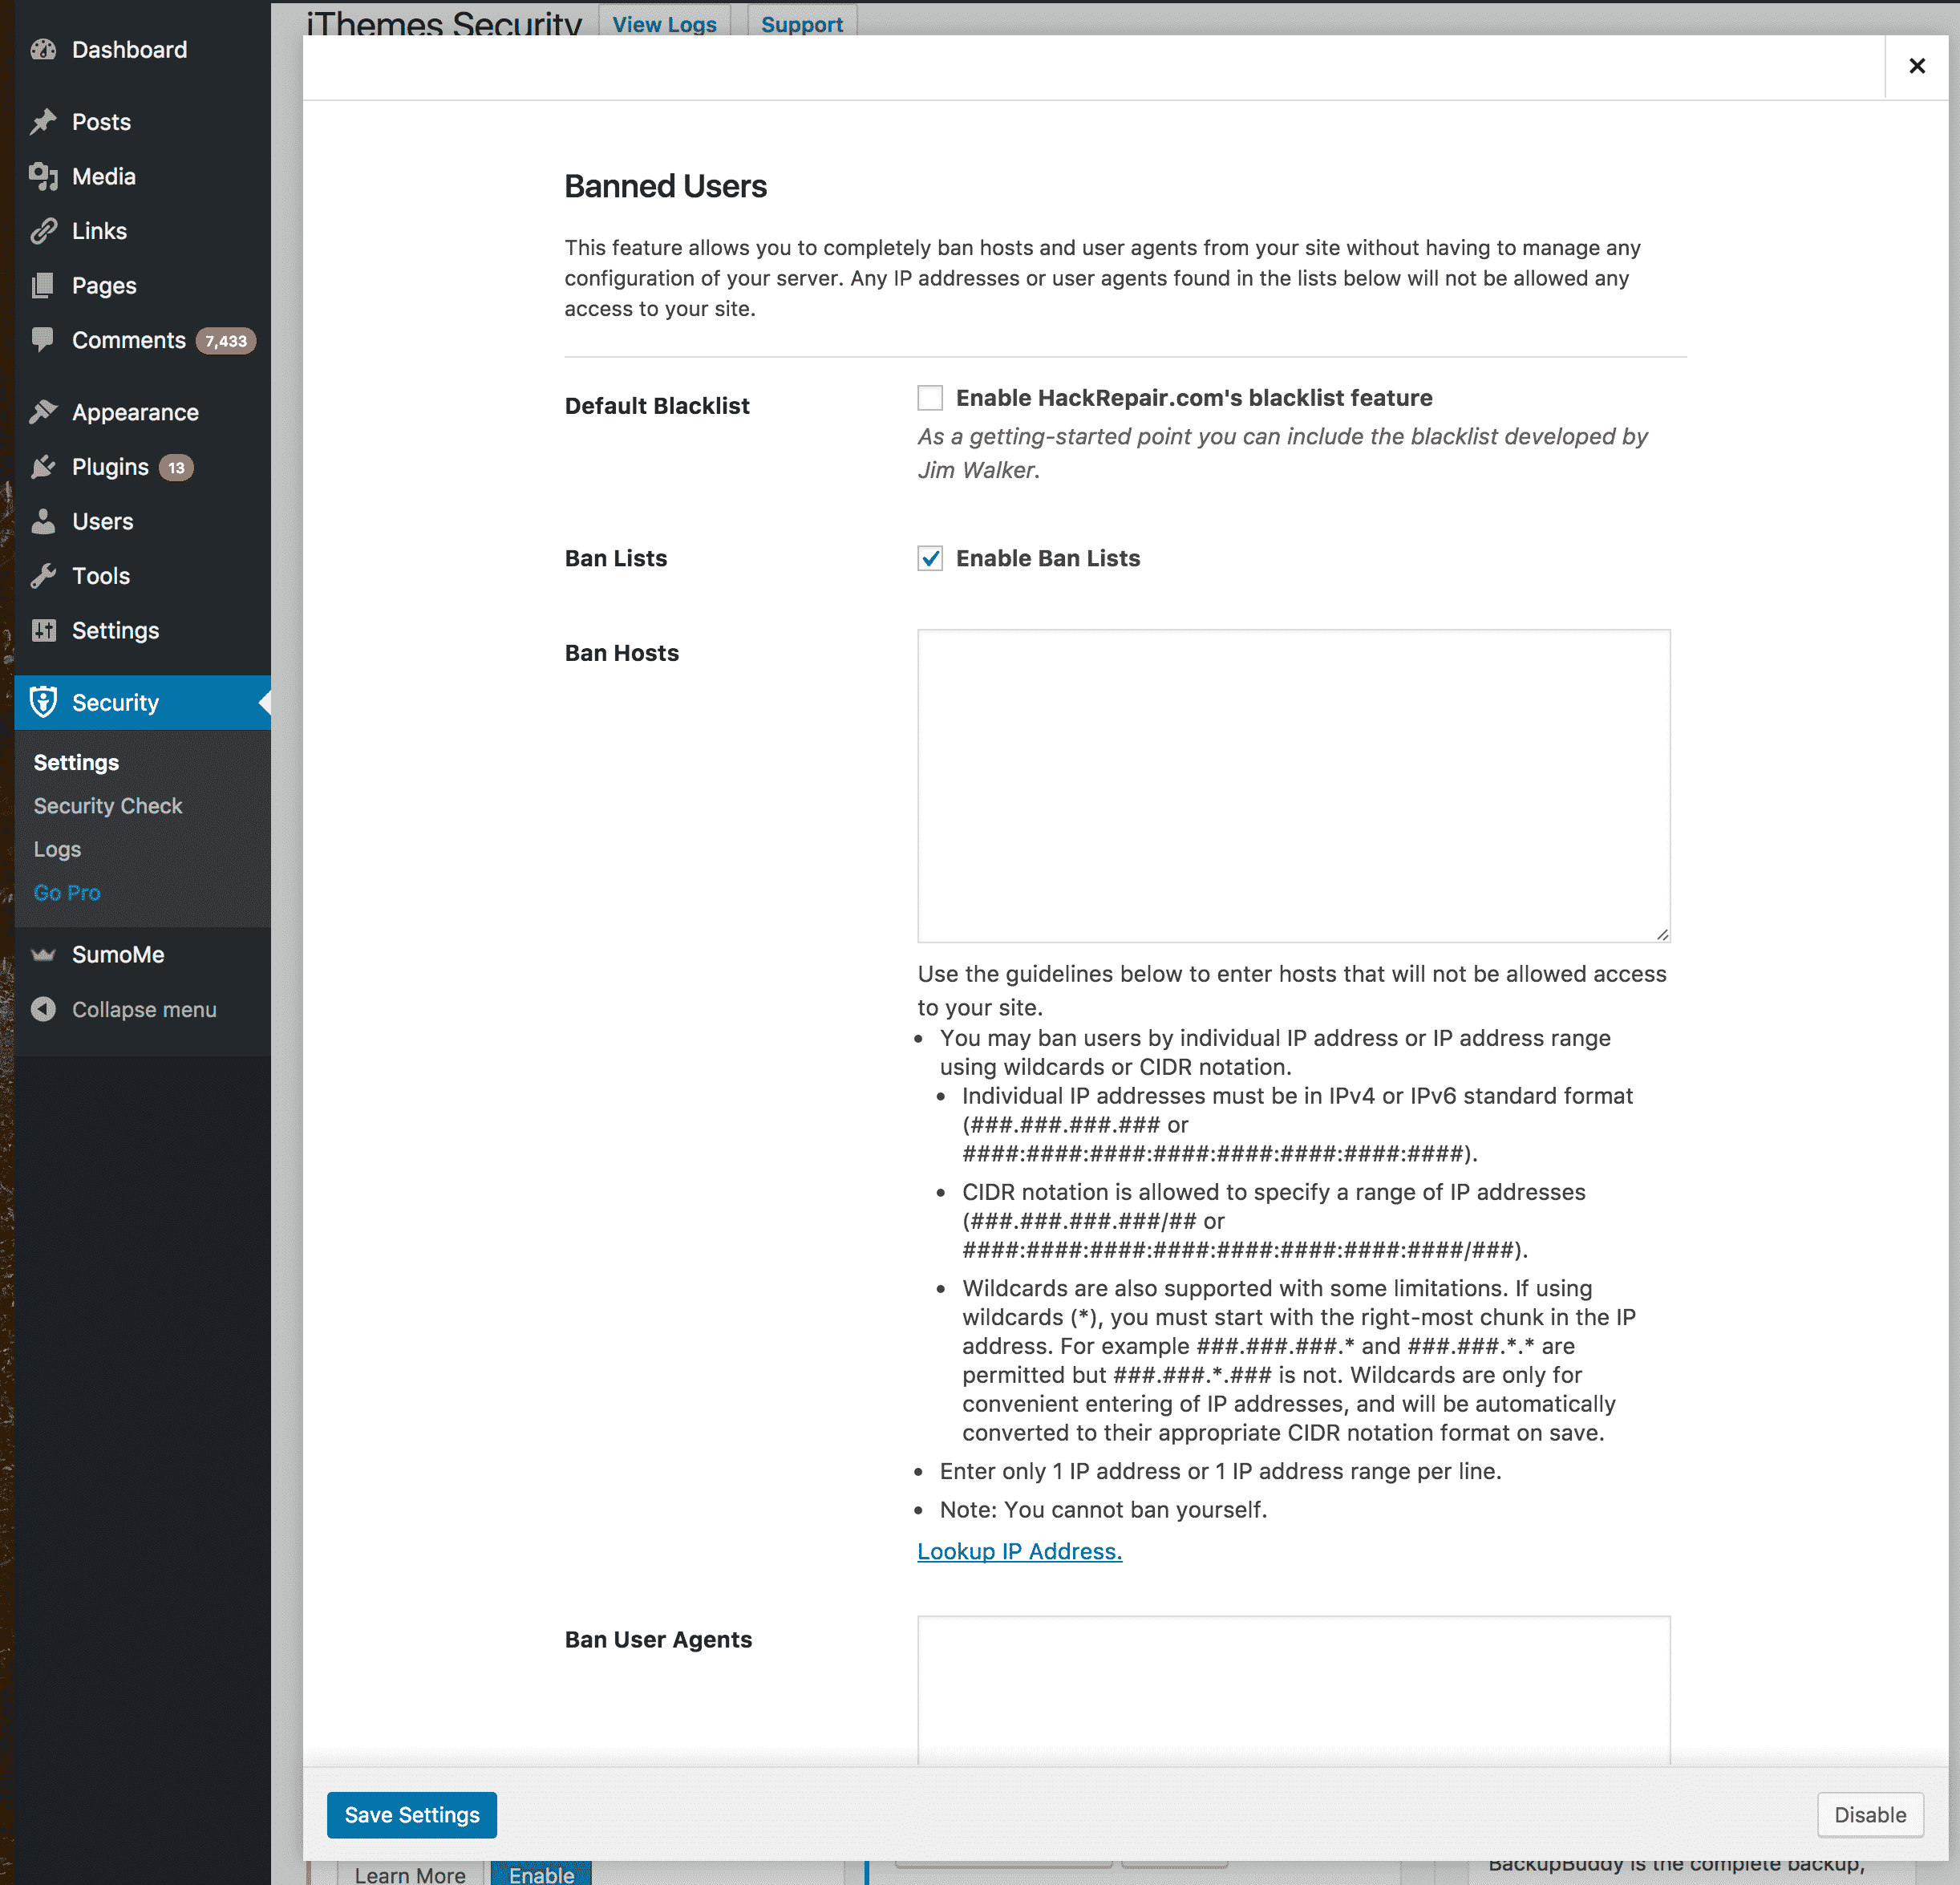 iThemes Banned Users Option